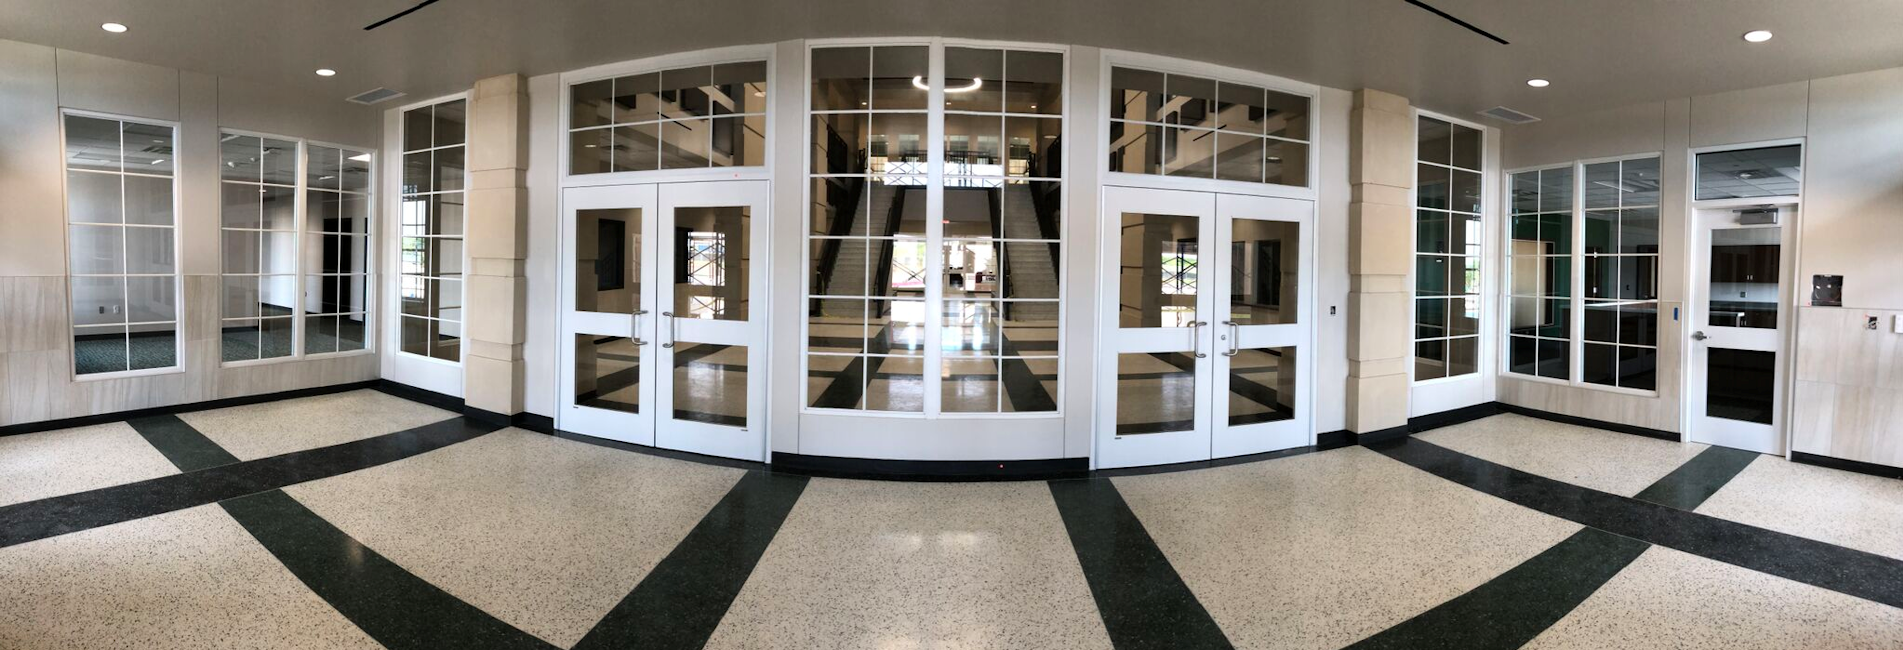 Custom Glass Installer Colleyville Texas Dallas Fort Worth Glass & Mirror Installation | Residential Glass | Commercial Glass & Glazing | AB Glass &